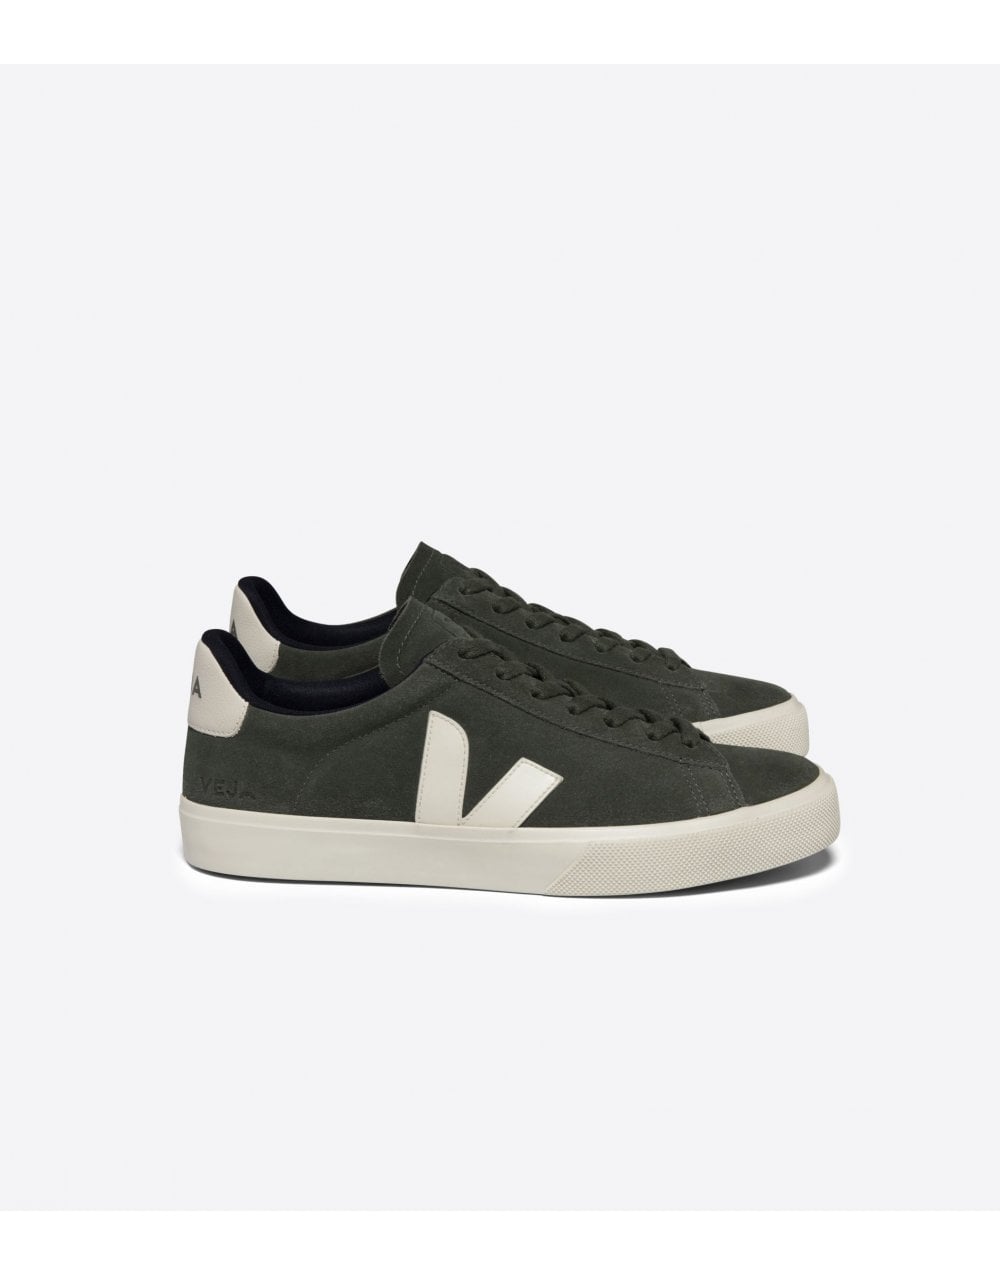 Veja Campo Suede Trainers Col: Mud/pierre, Size: 4